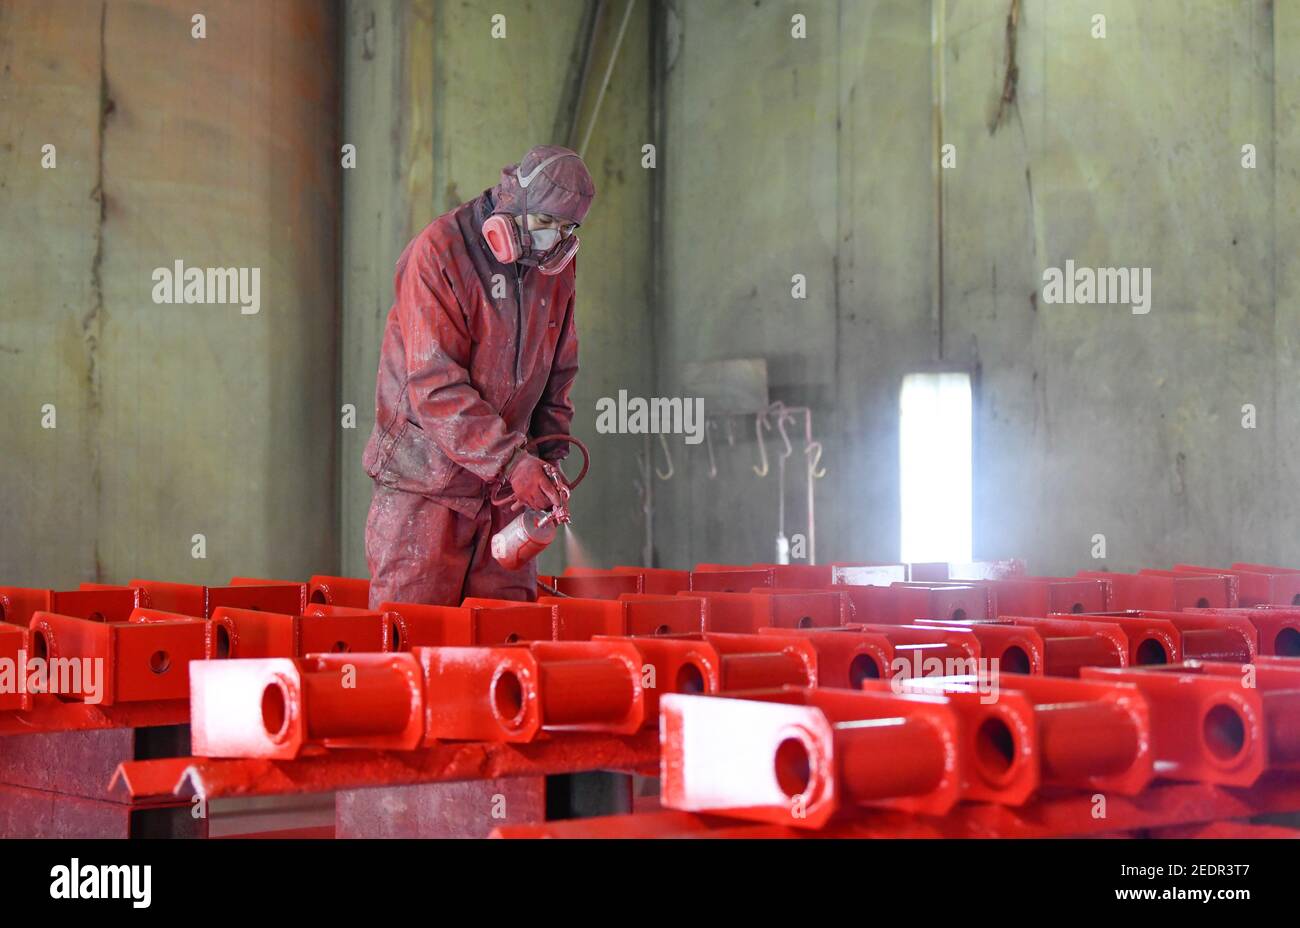 Tianjin, China. 14th Feb, 2021. A laborer works at a workshop of AE (Tianjin) Automotive Equipment Co., Ltd. in Tianjin, north China, Feb. 14, 2021. About 300 production workers of this company chose to stay put at their working position during this year's Spring Festival. Credit: Sun Fanyue/Xinhua/Alamy Live News Stock Photo